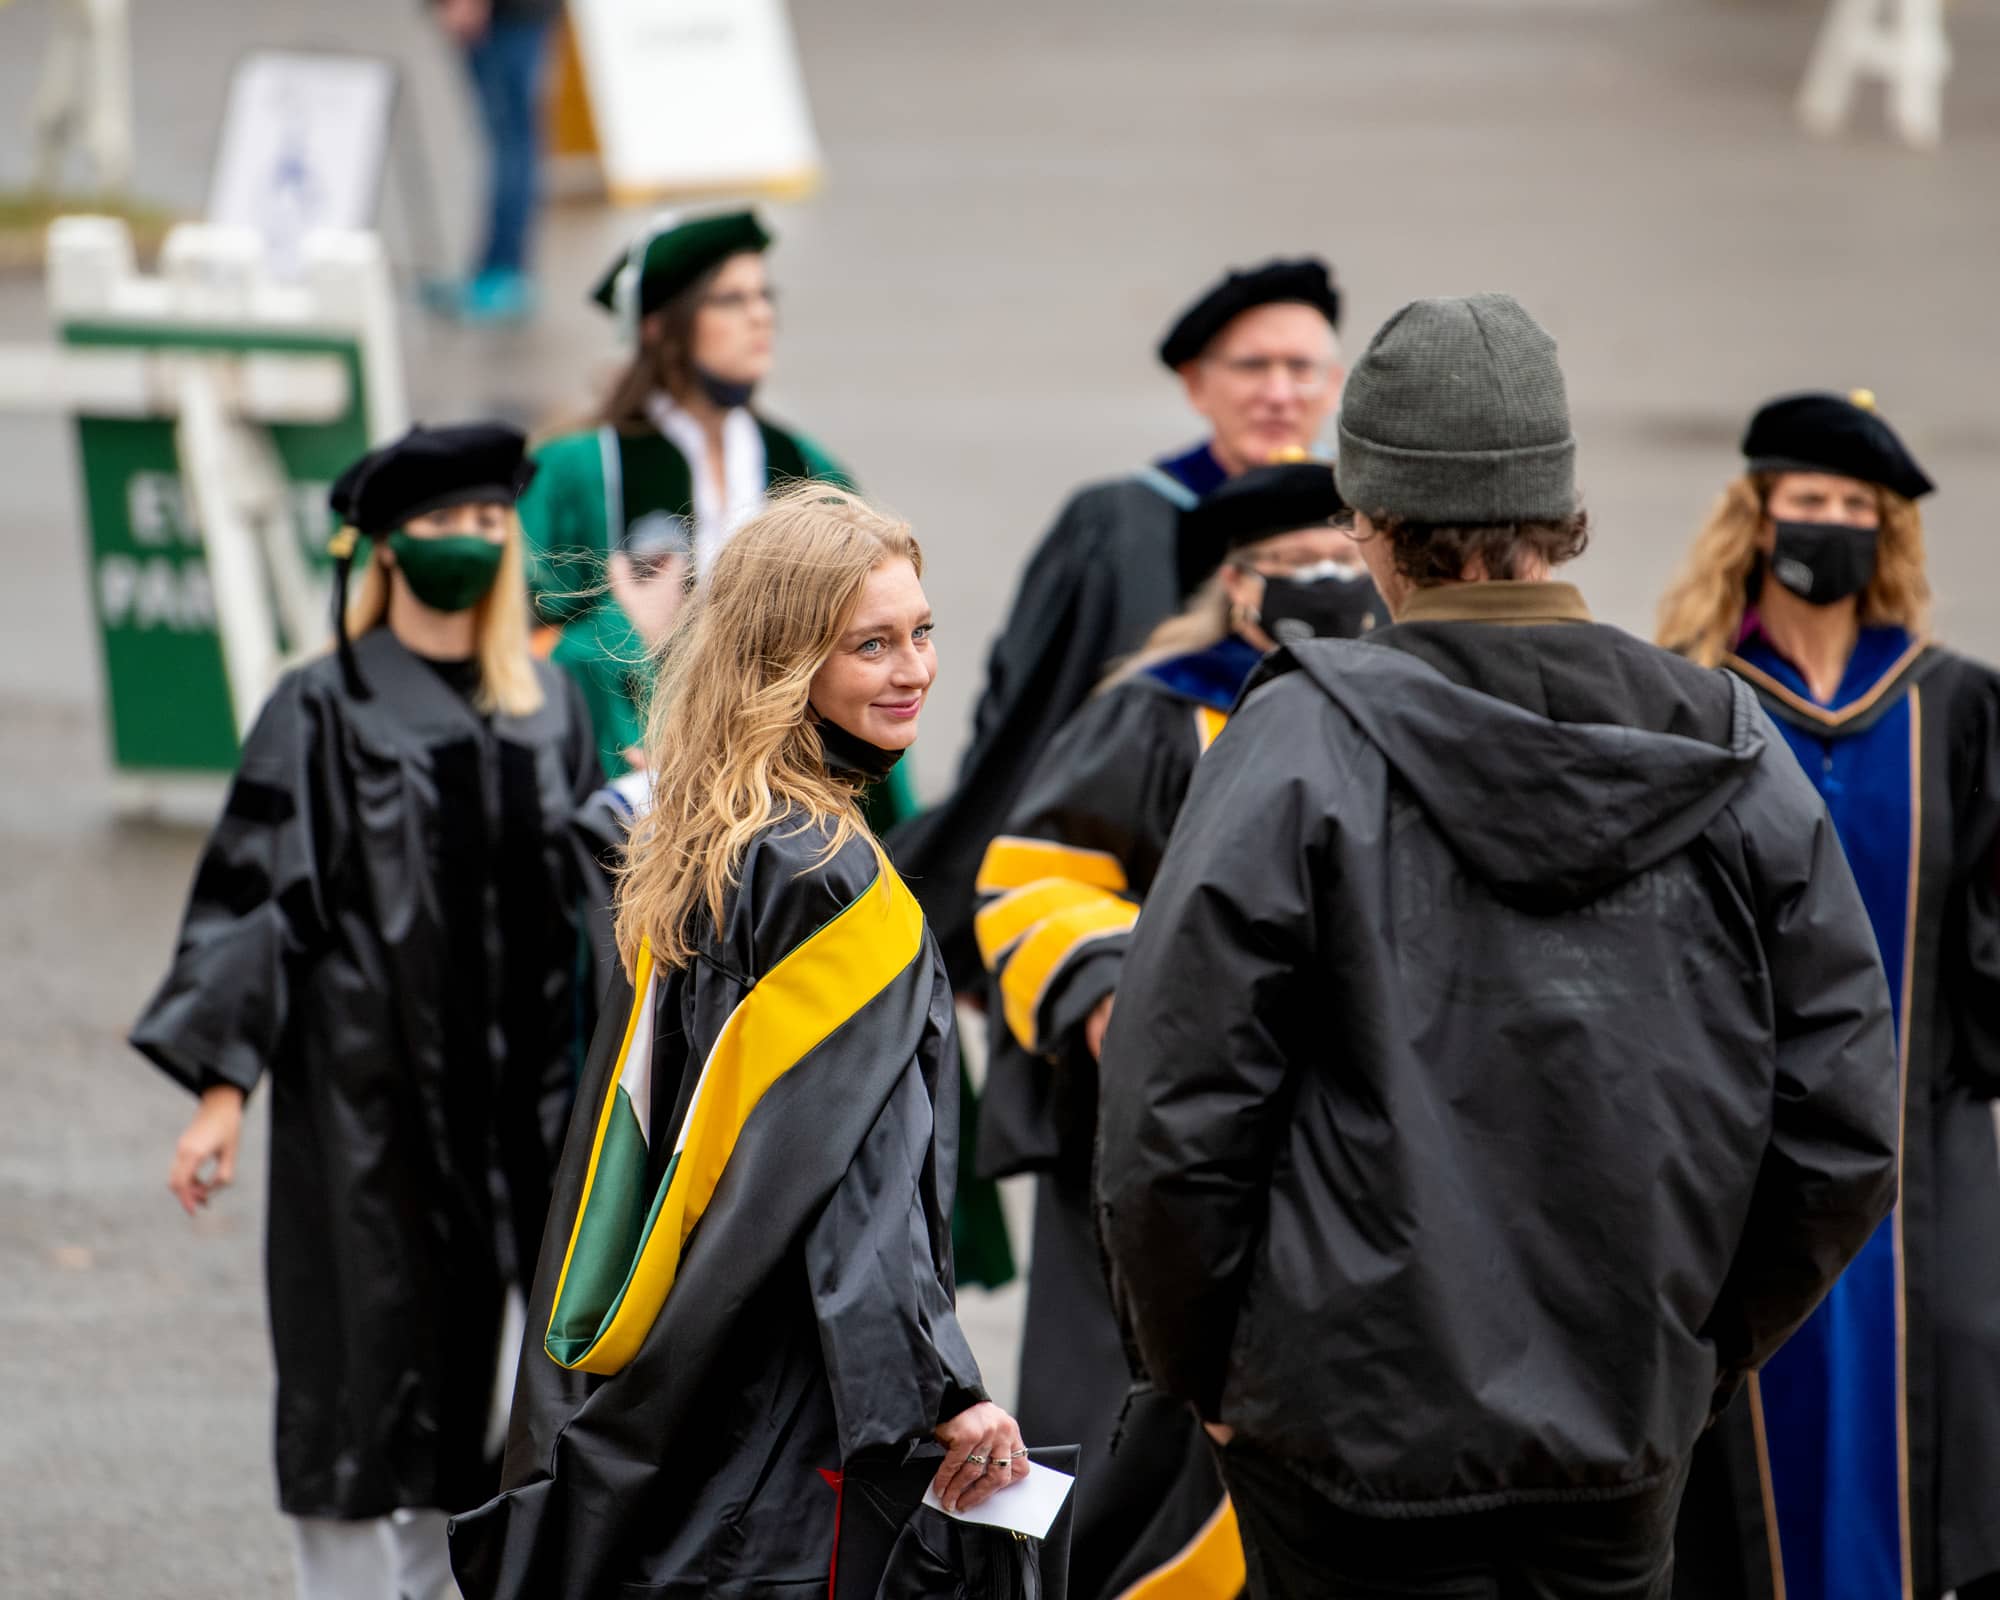 Ryanne Celeste, left, makes her way to the Convocation Center with her partner Chris Seymour, right, prior to the Fall Commencement 2021 at the Athens Campus.